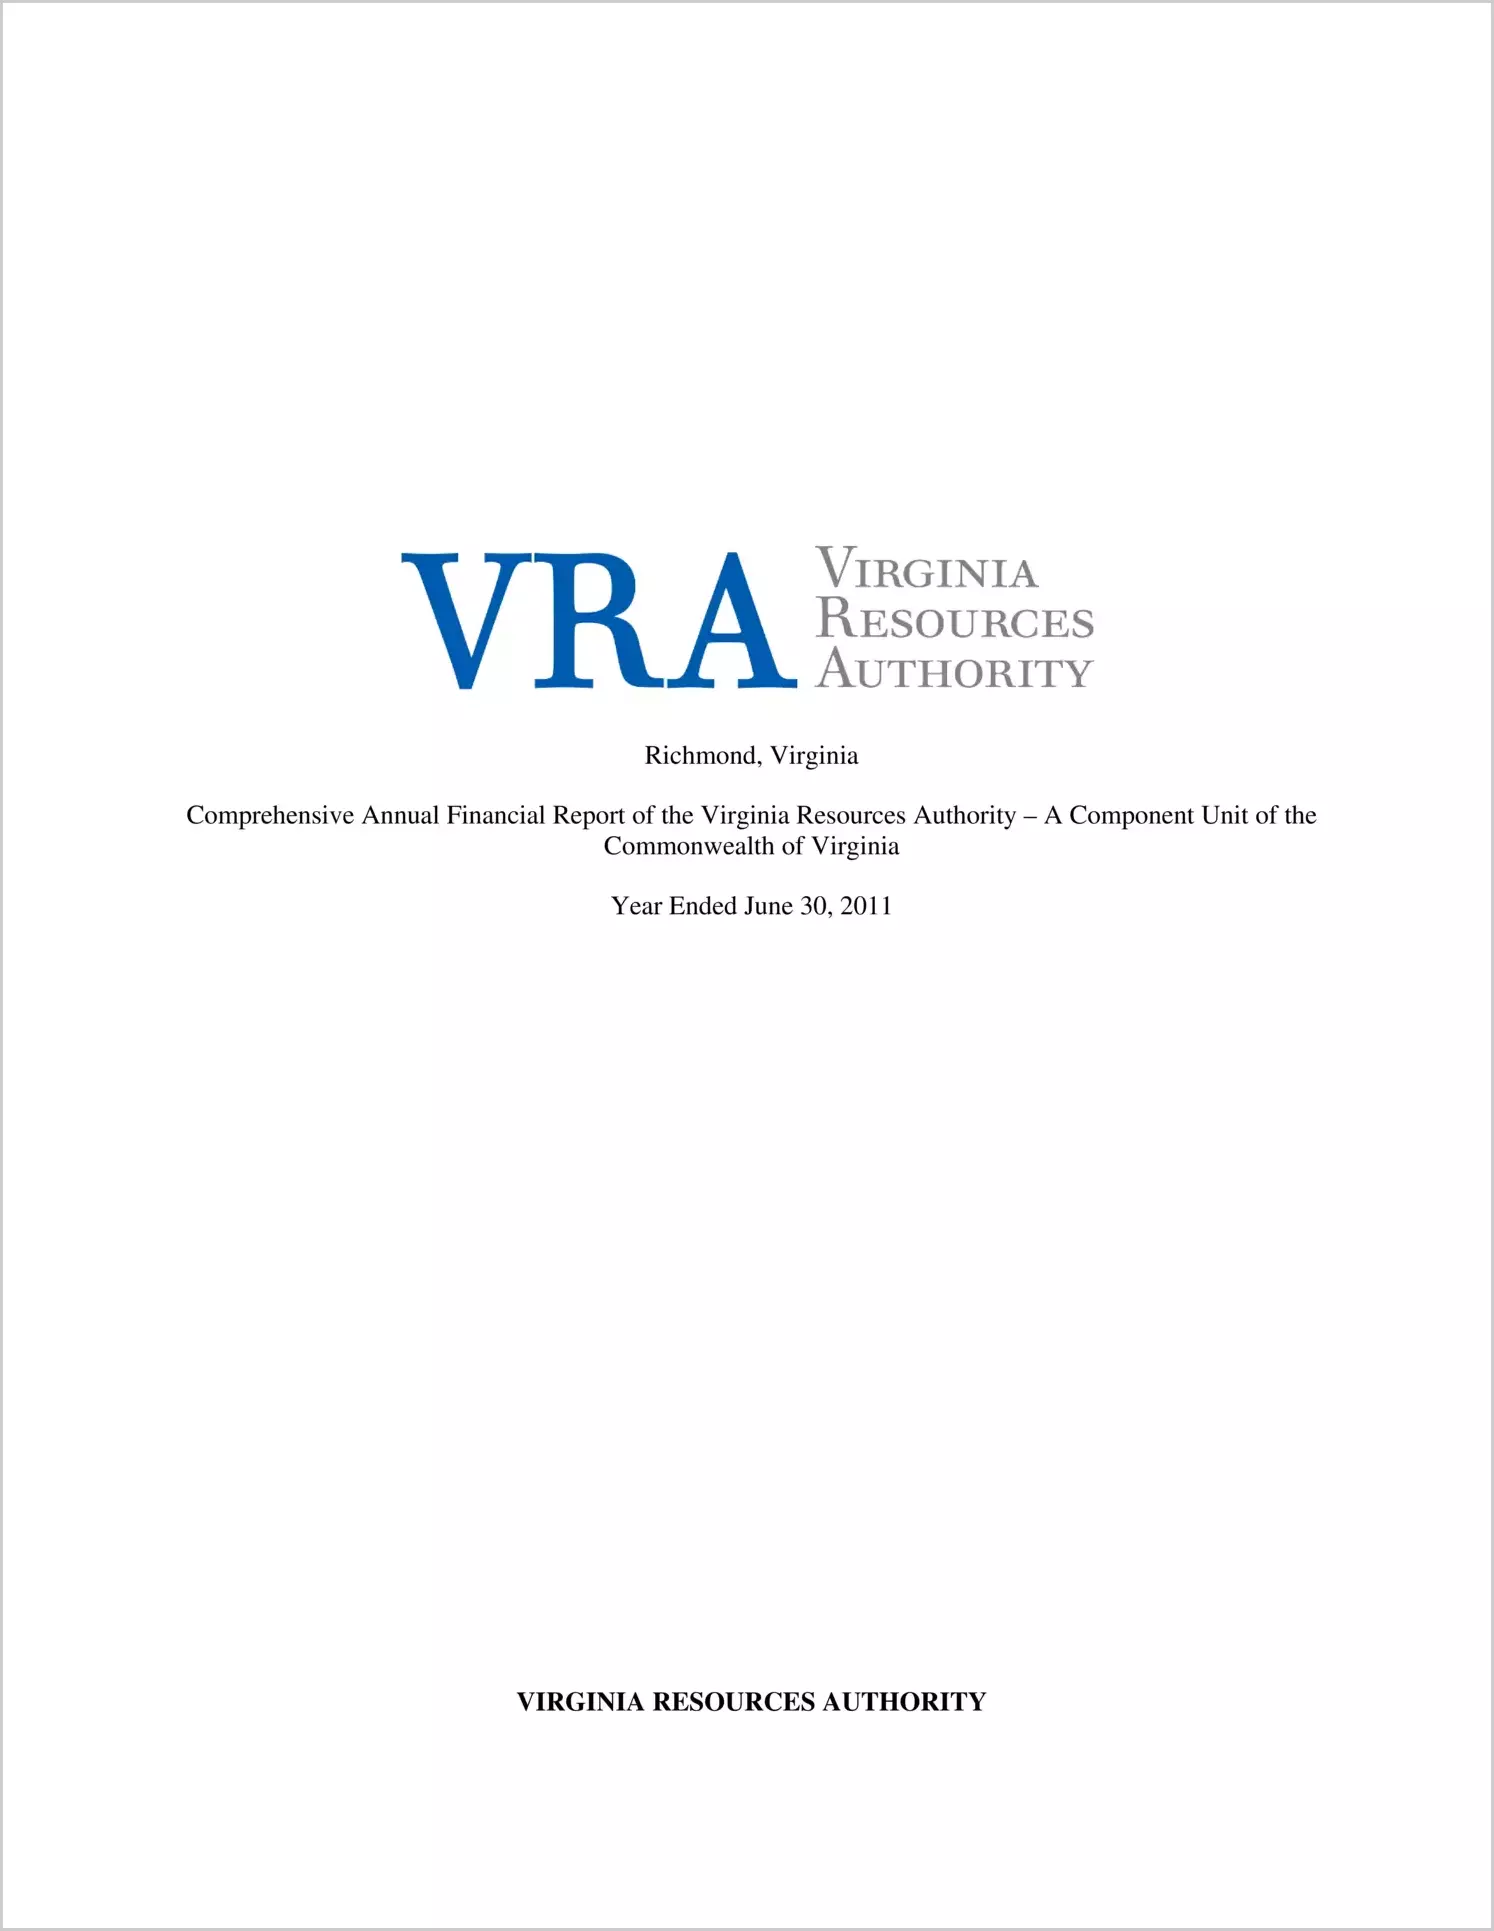 Virginia Resources Authority Financial Statements for the fiscal year ended June 30, 2011